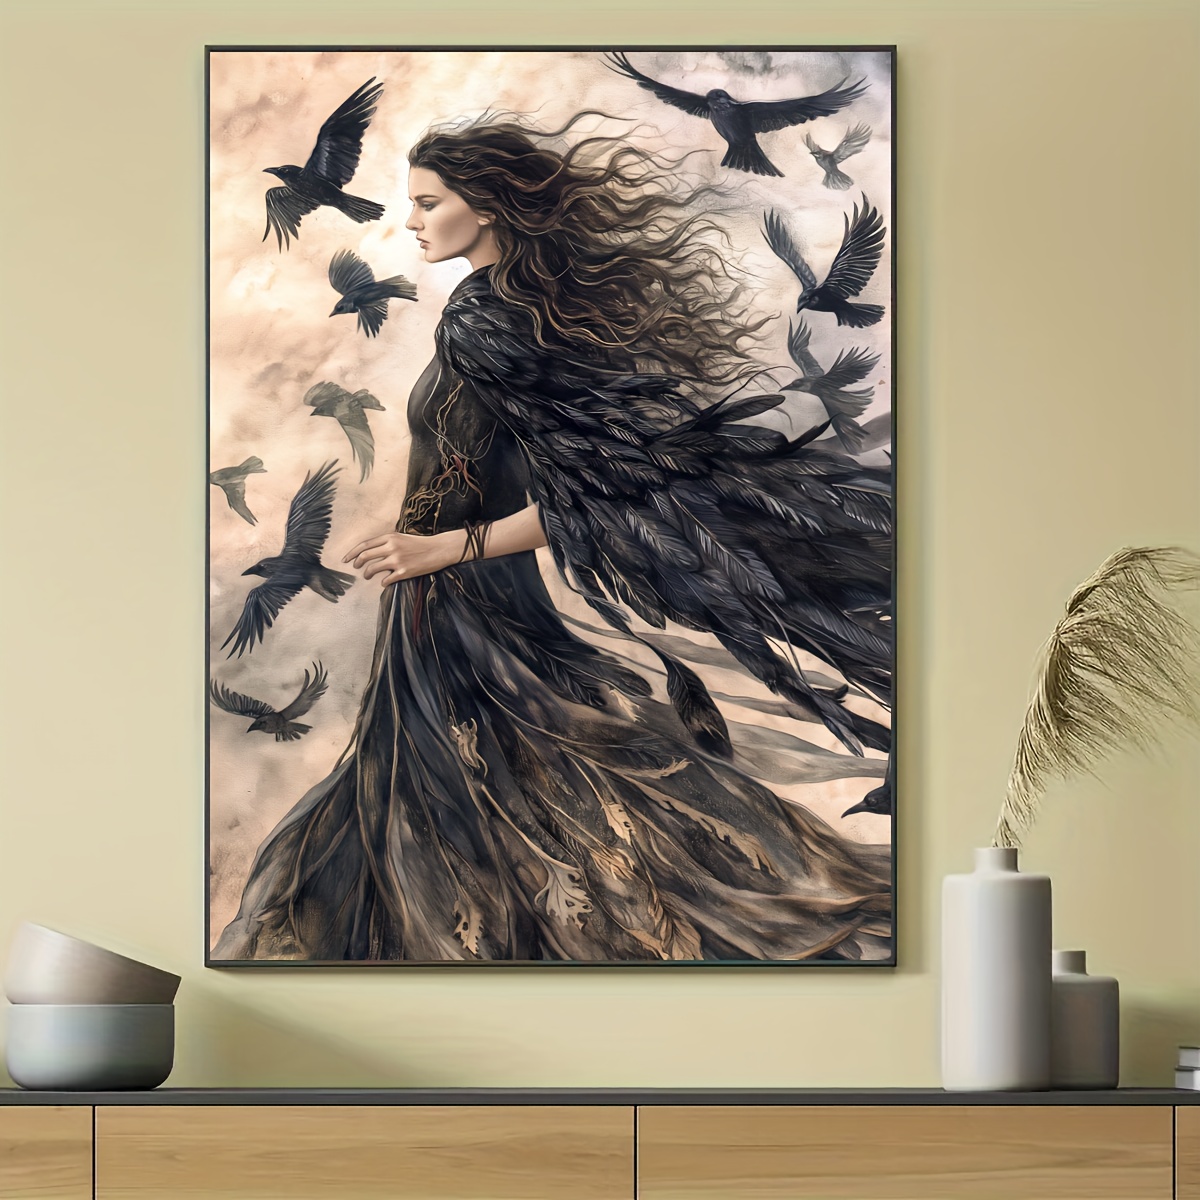 

1pc Feather Goddess Wall Art Canvas Print, Fabric Poster For Home Decor – Ideal For Living Room, Bedroom, Kitchen, Office, Café – Thoughtful Gift & Chic Decoration, No Frame